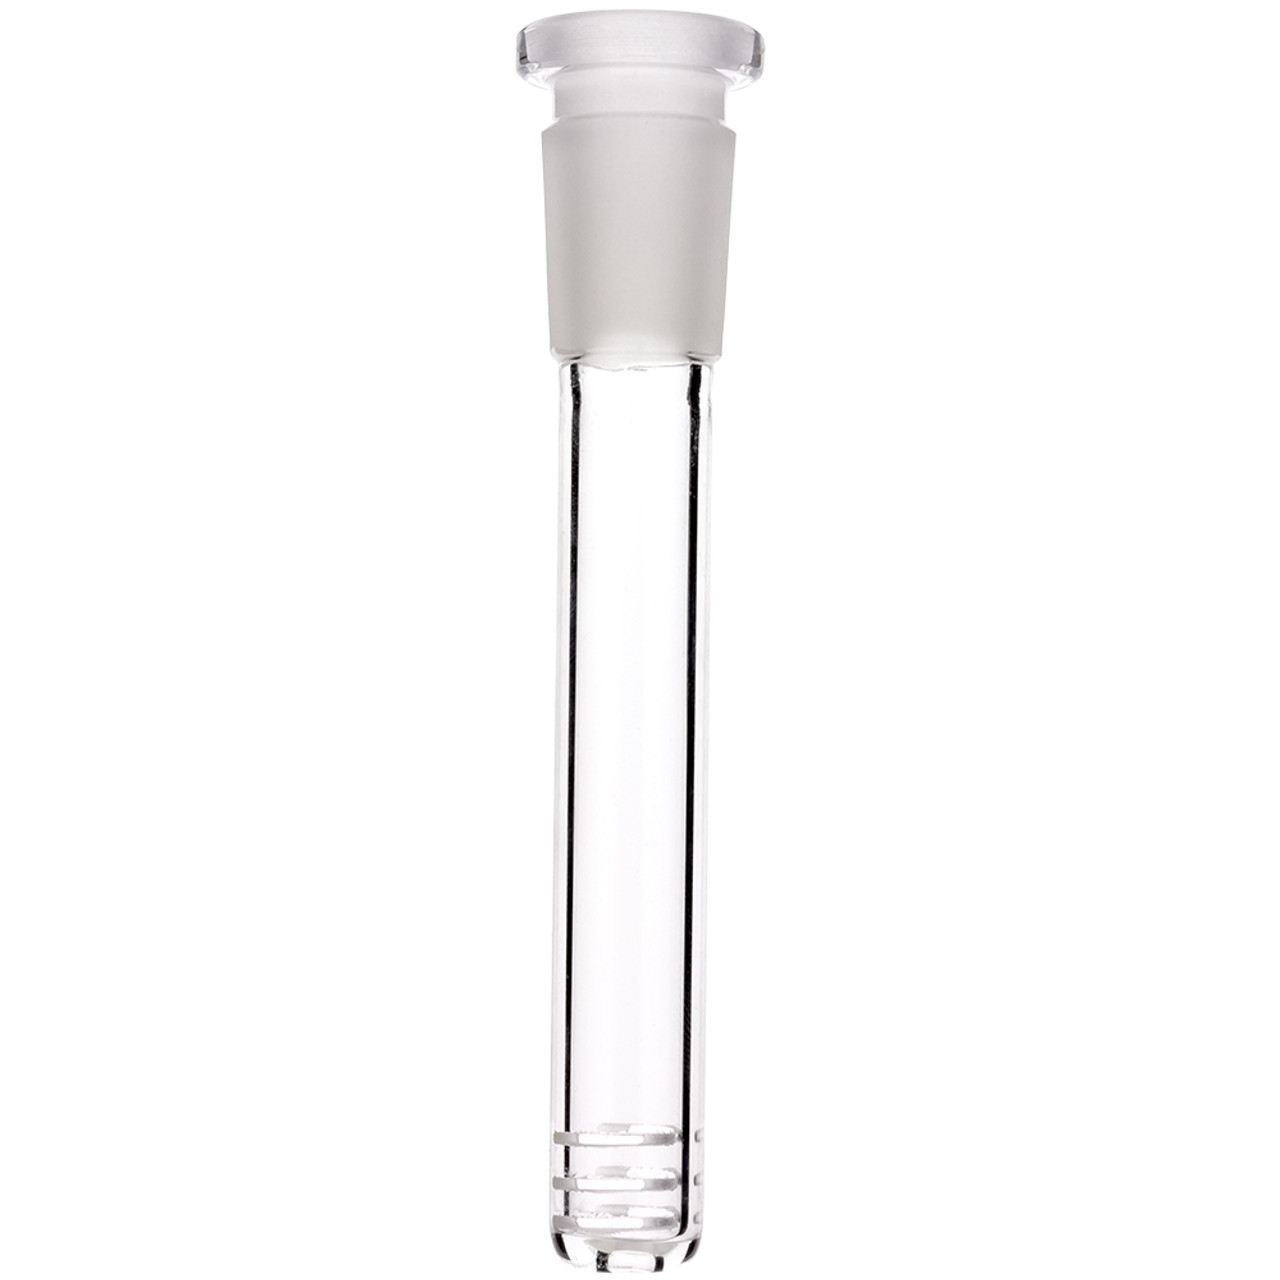 Valiant 3-inch 6-Cut Replacement Downstem